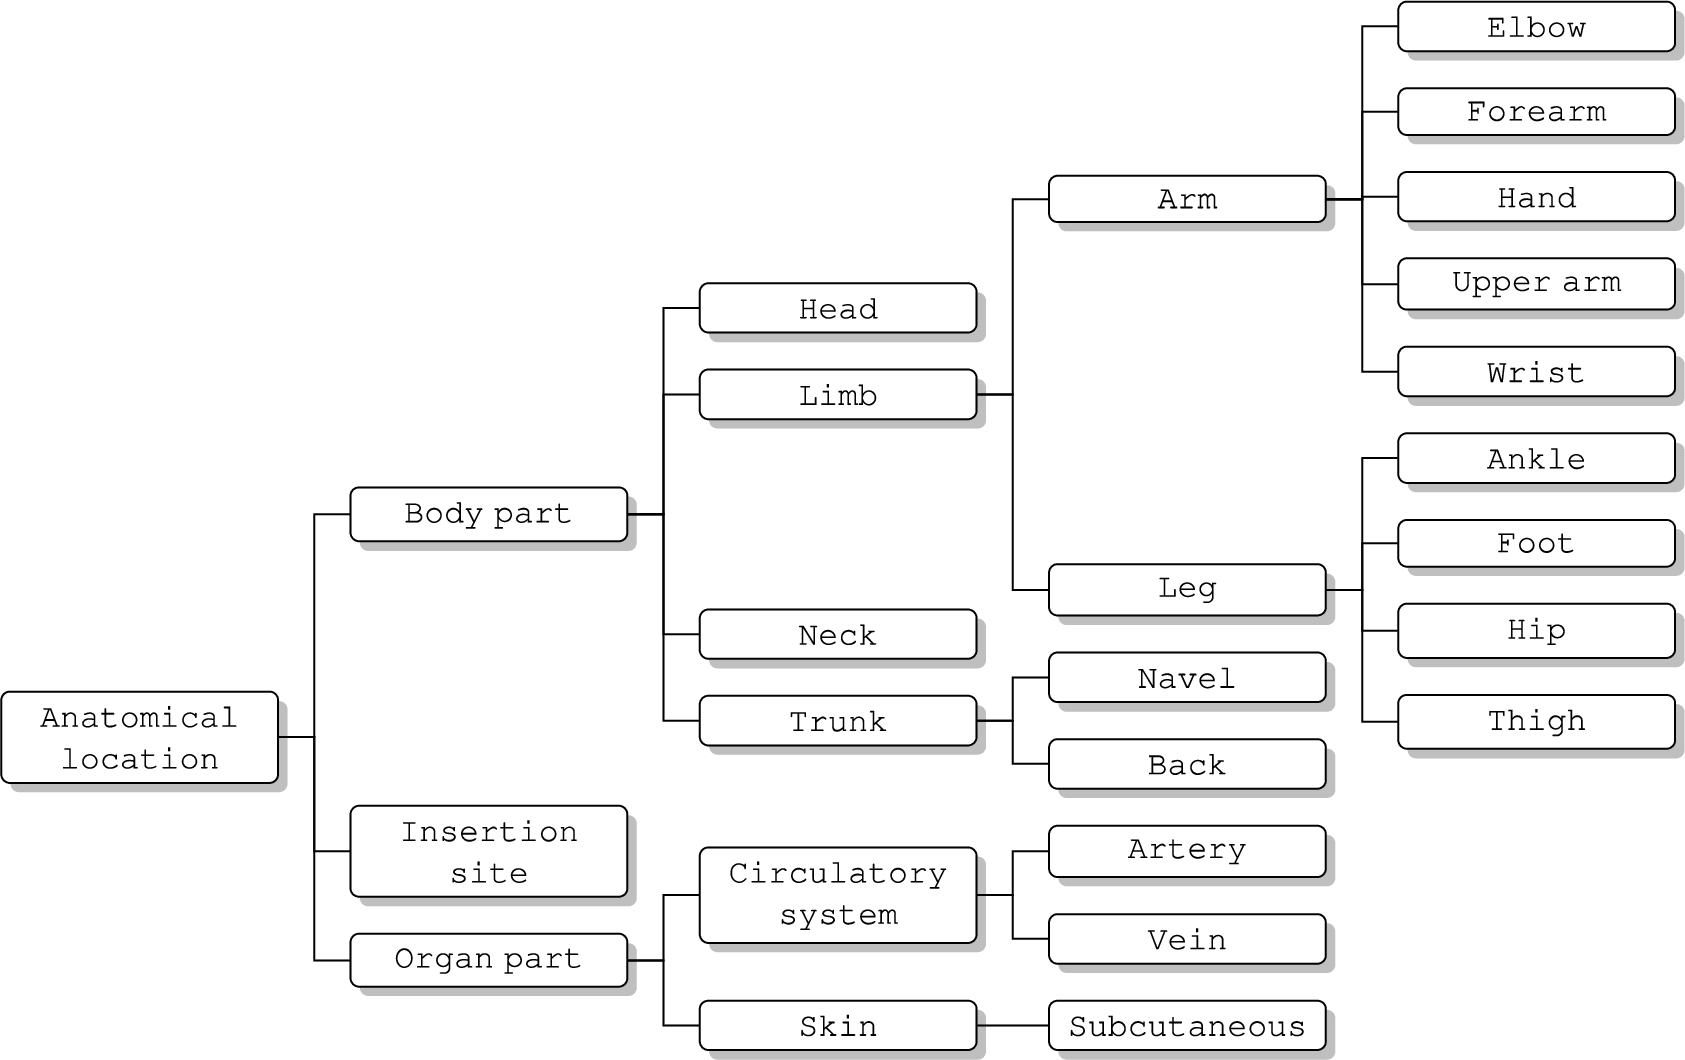 AAENOTE anatomical location class hierarchy.